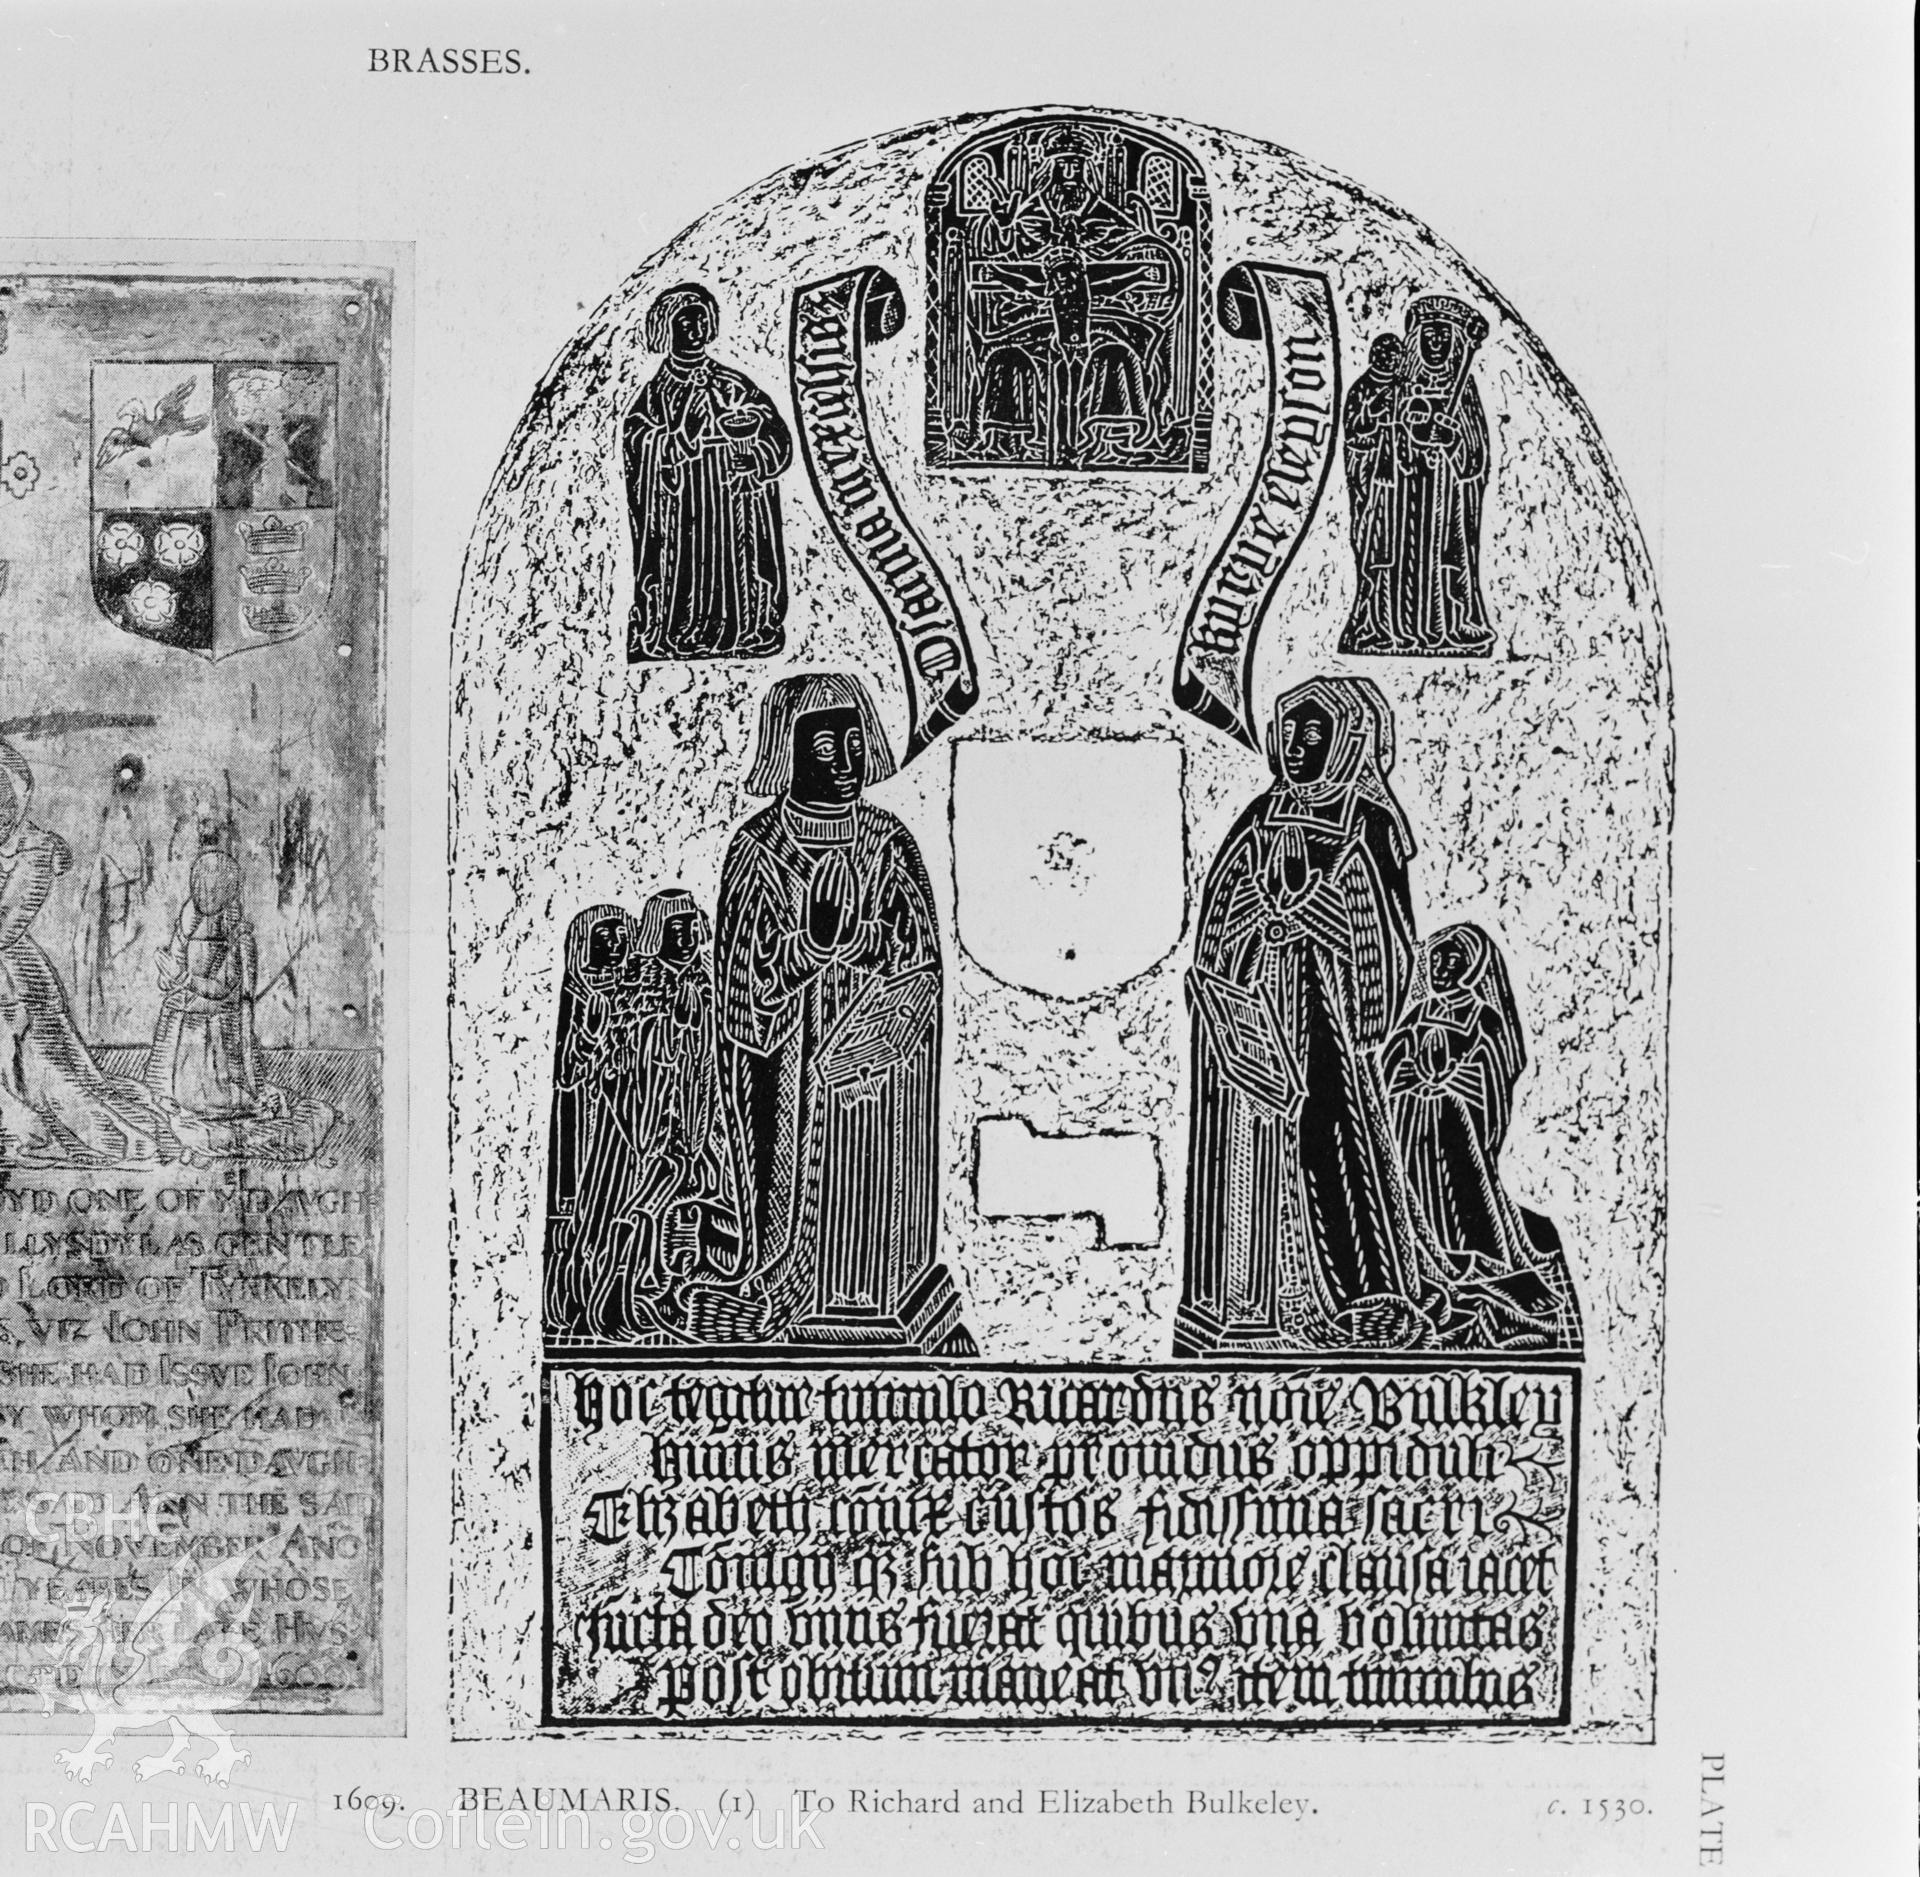 Photographic print of a drawing of the brass to Richard Bulkeley and his wife at SS Mary and Nicholas' Church, Beaumaris. Copy negative held.